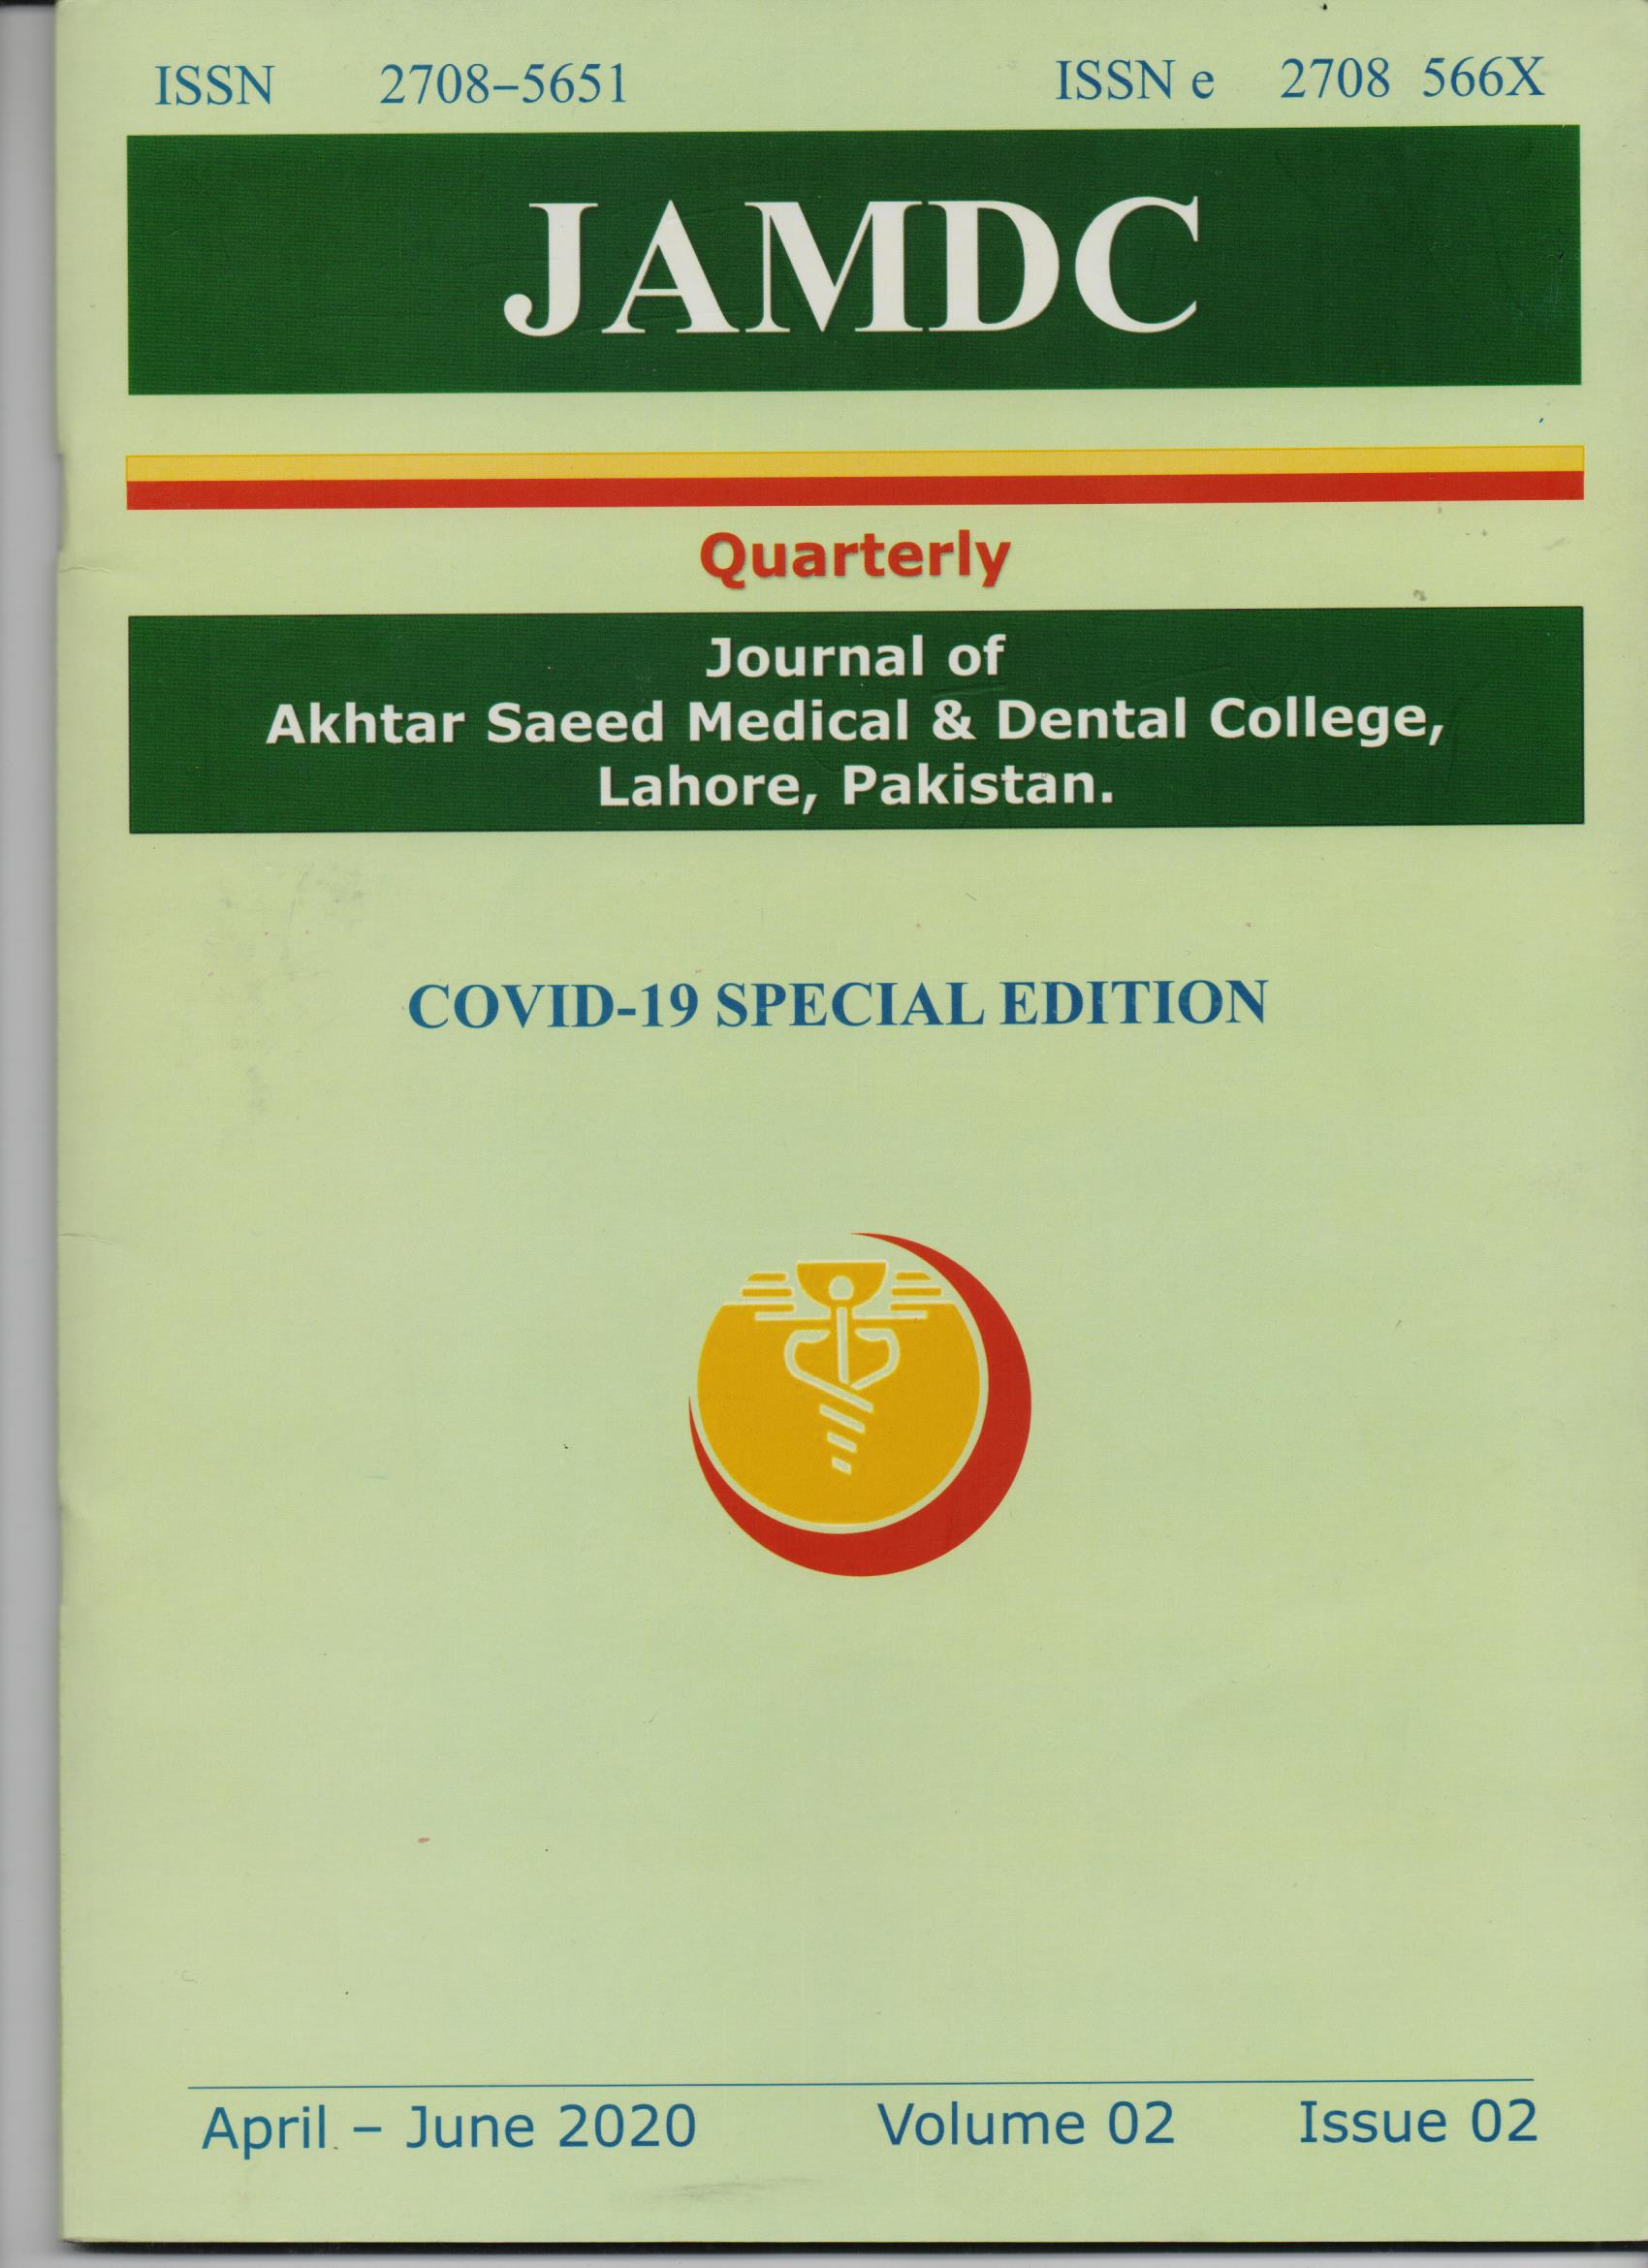 Journal of Akhtar Saeed Medical & Dental College, Lahore